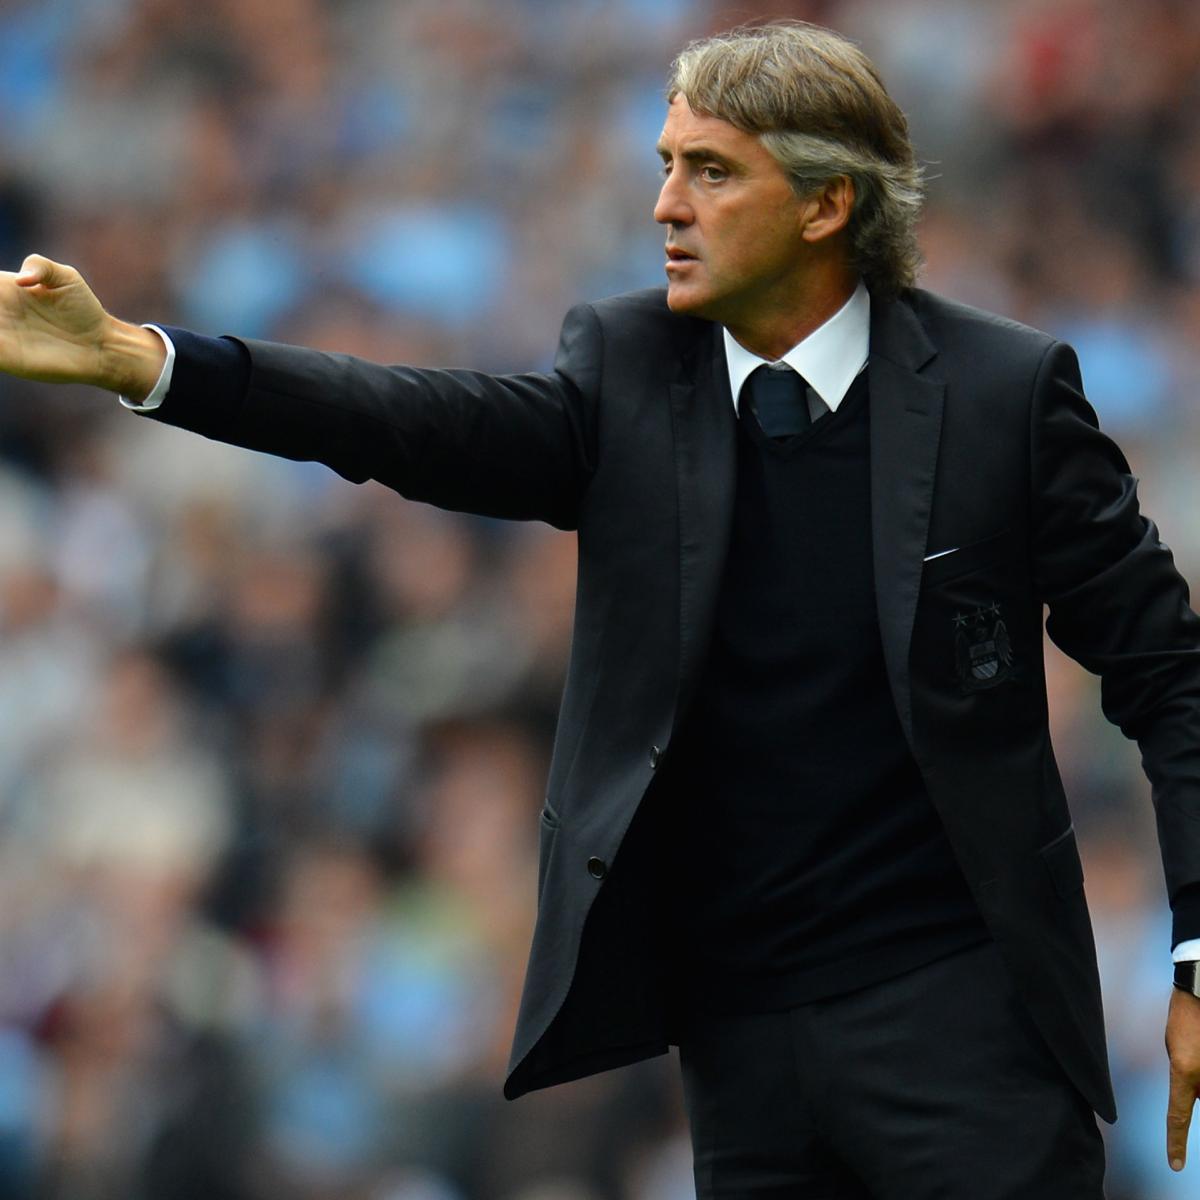 Roberto Mancini's 8 Most Important Decisions So Far as Man City Manager